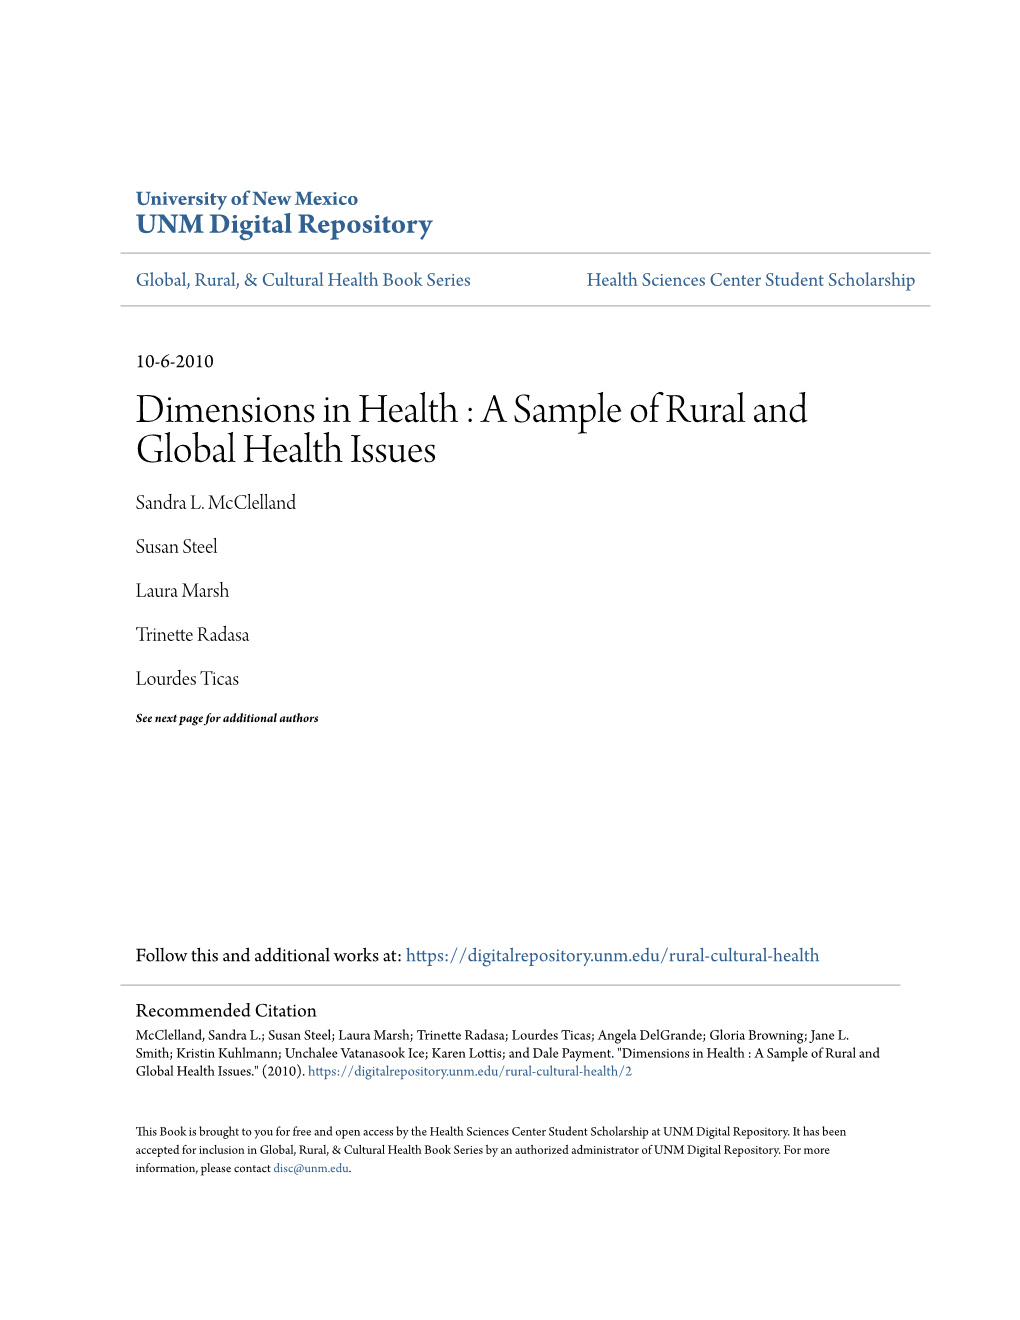 A Sample of Rural and Global Health Issues Sandra L